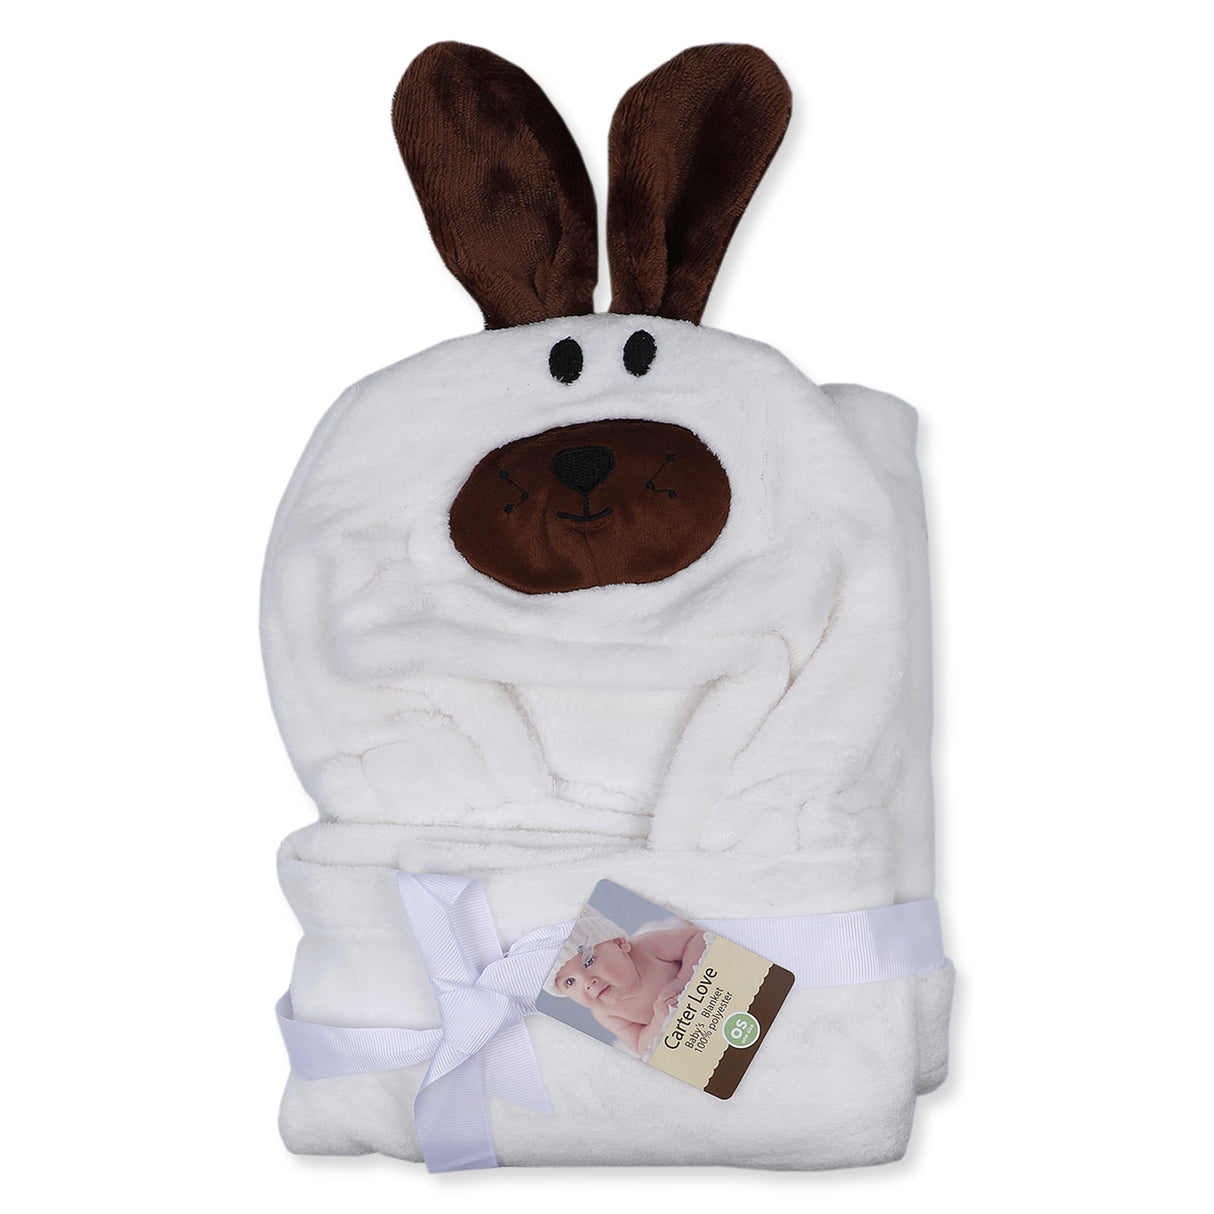 Carter Love Adrolable Animal Hooded Blanket